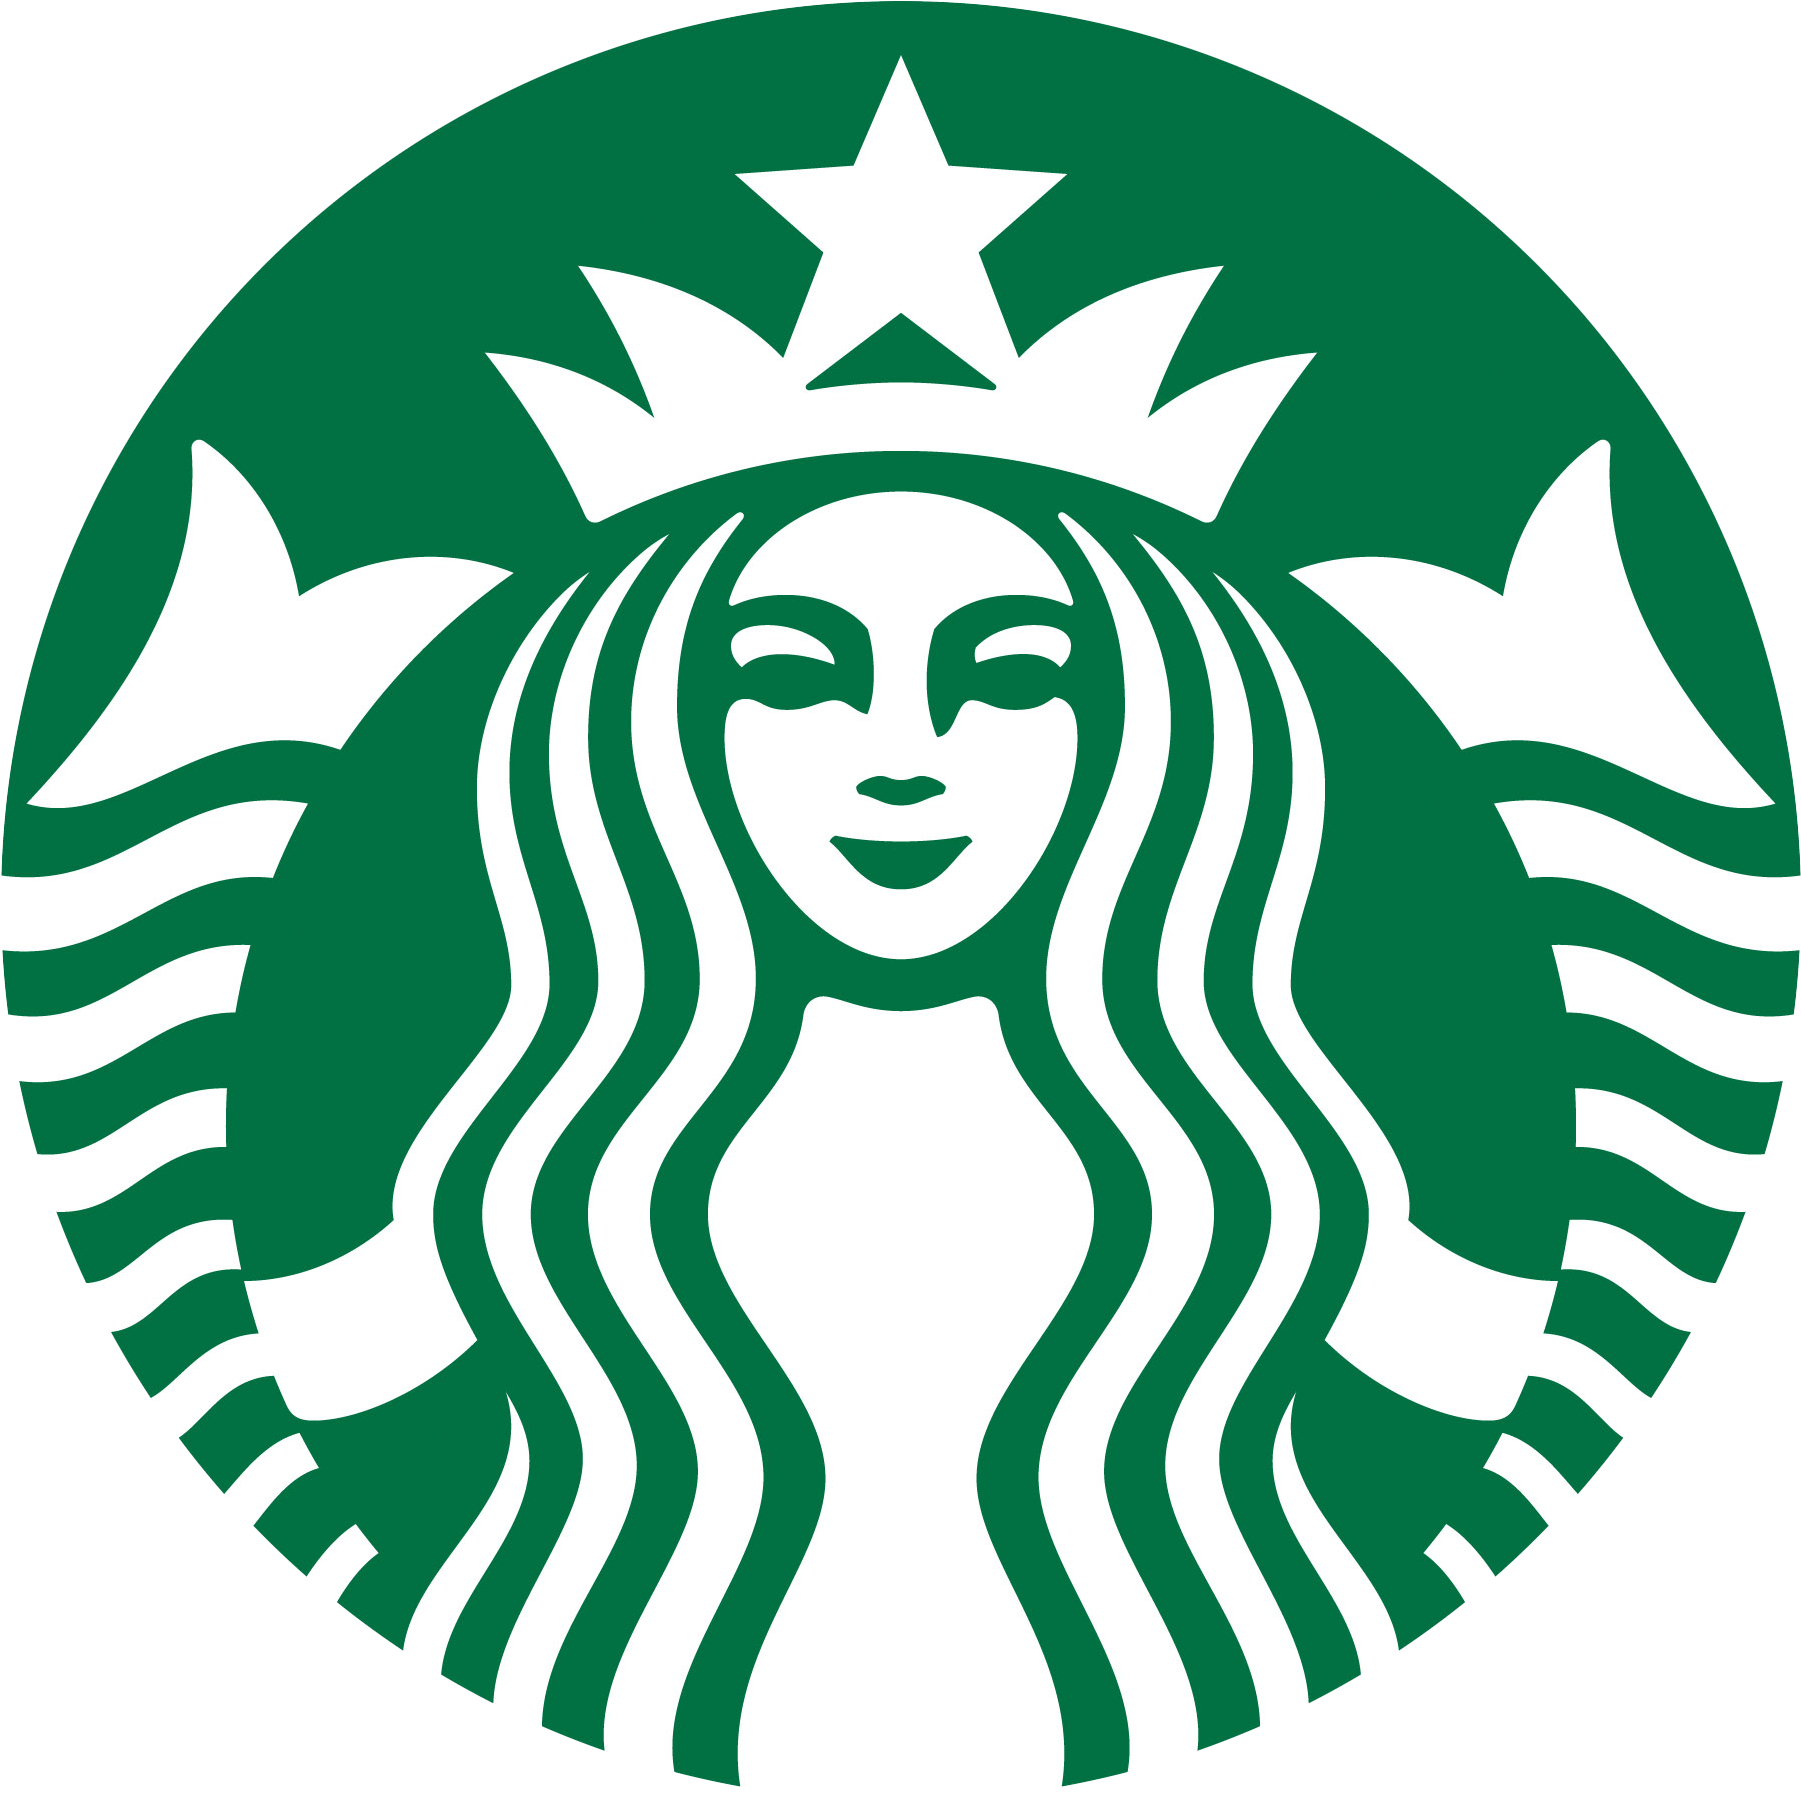 Additionally, Starbucks' Constant Engagement With Fans - Starbucks Gift Card - Value (2000x2000)